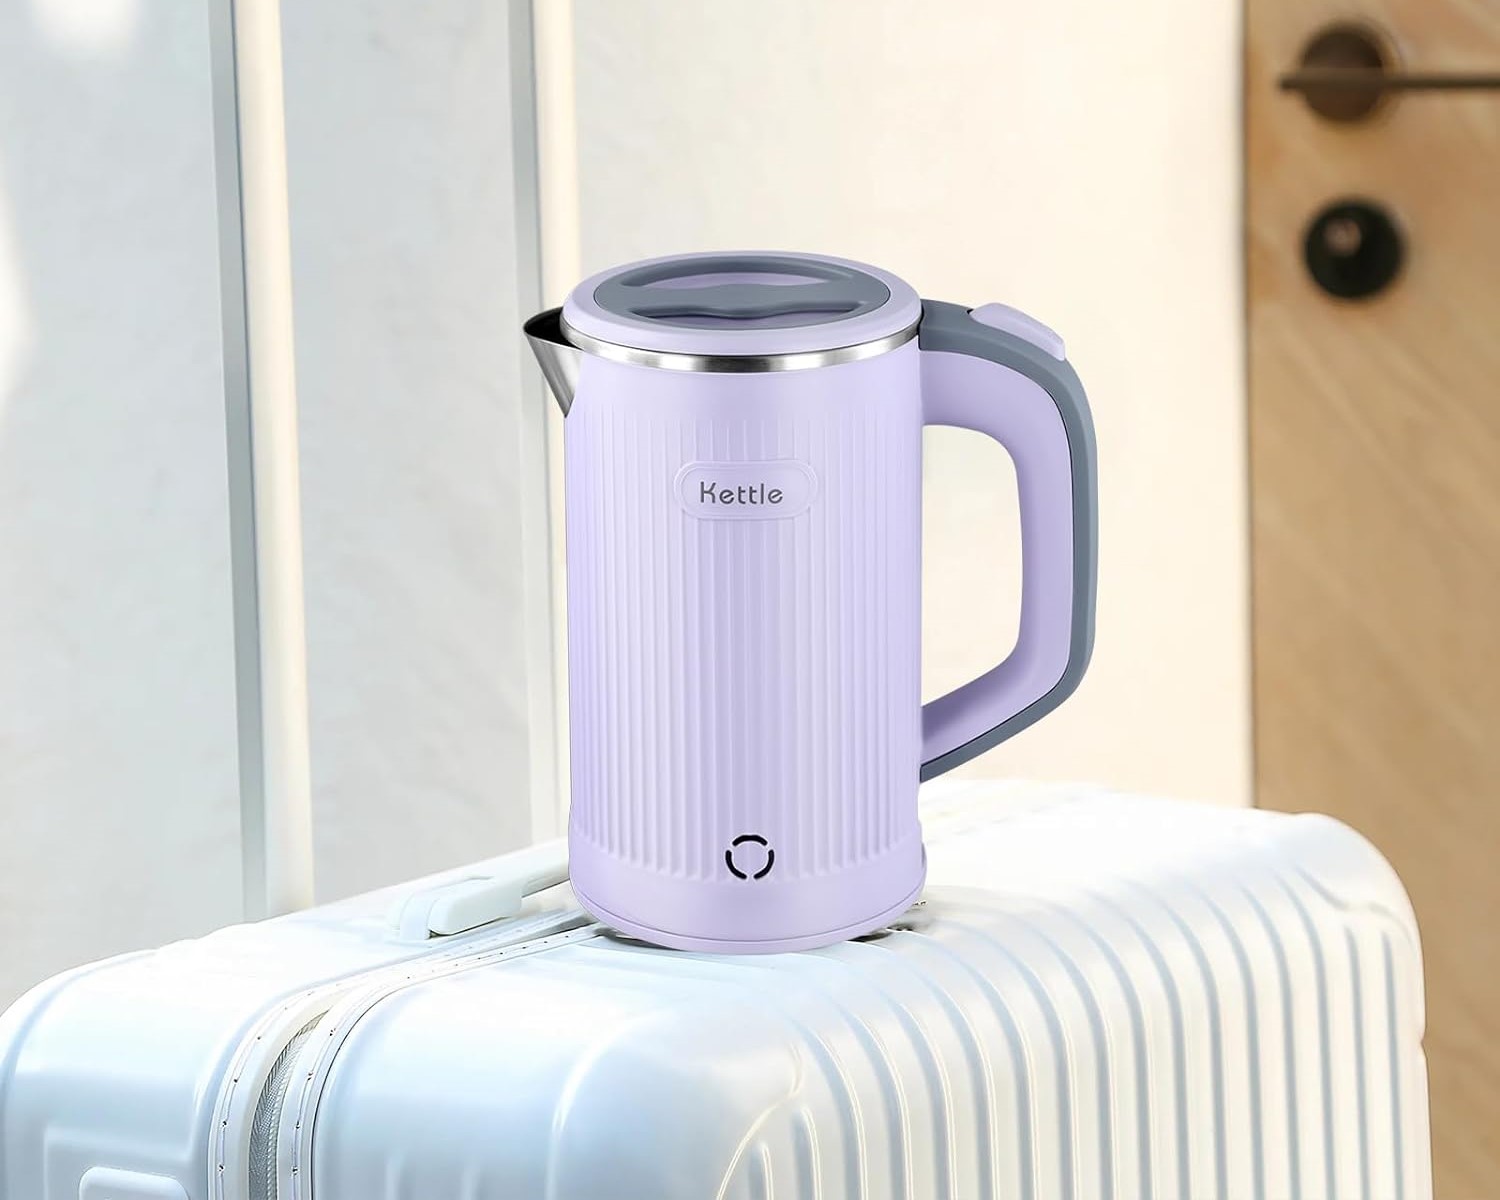 Dezin Electric Kettle, 0.8L Portable Travel Kettle with Double Wall  Construction, 304 Stainless Steel Electric Tea Kettle for Business Trip,  Small